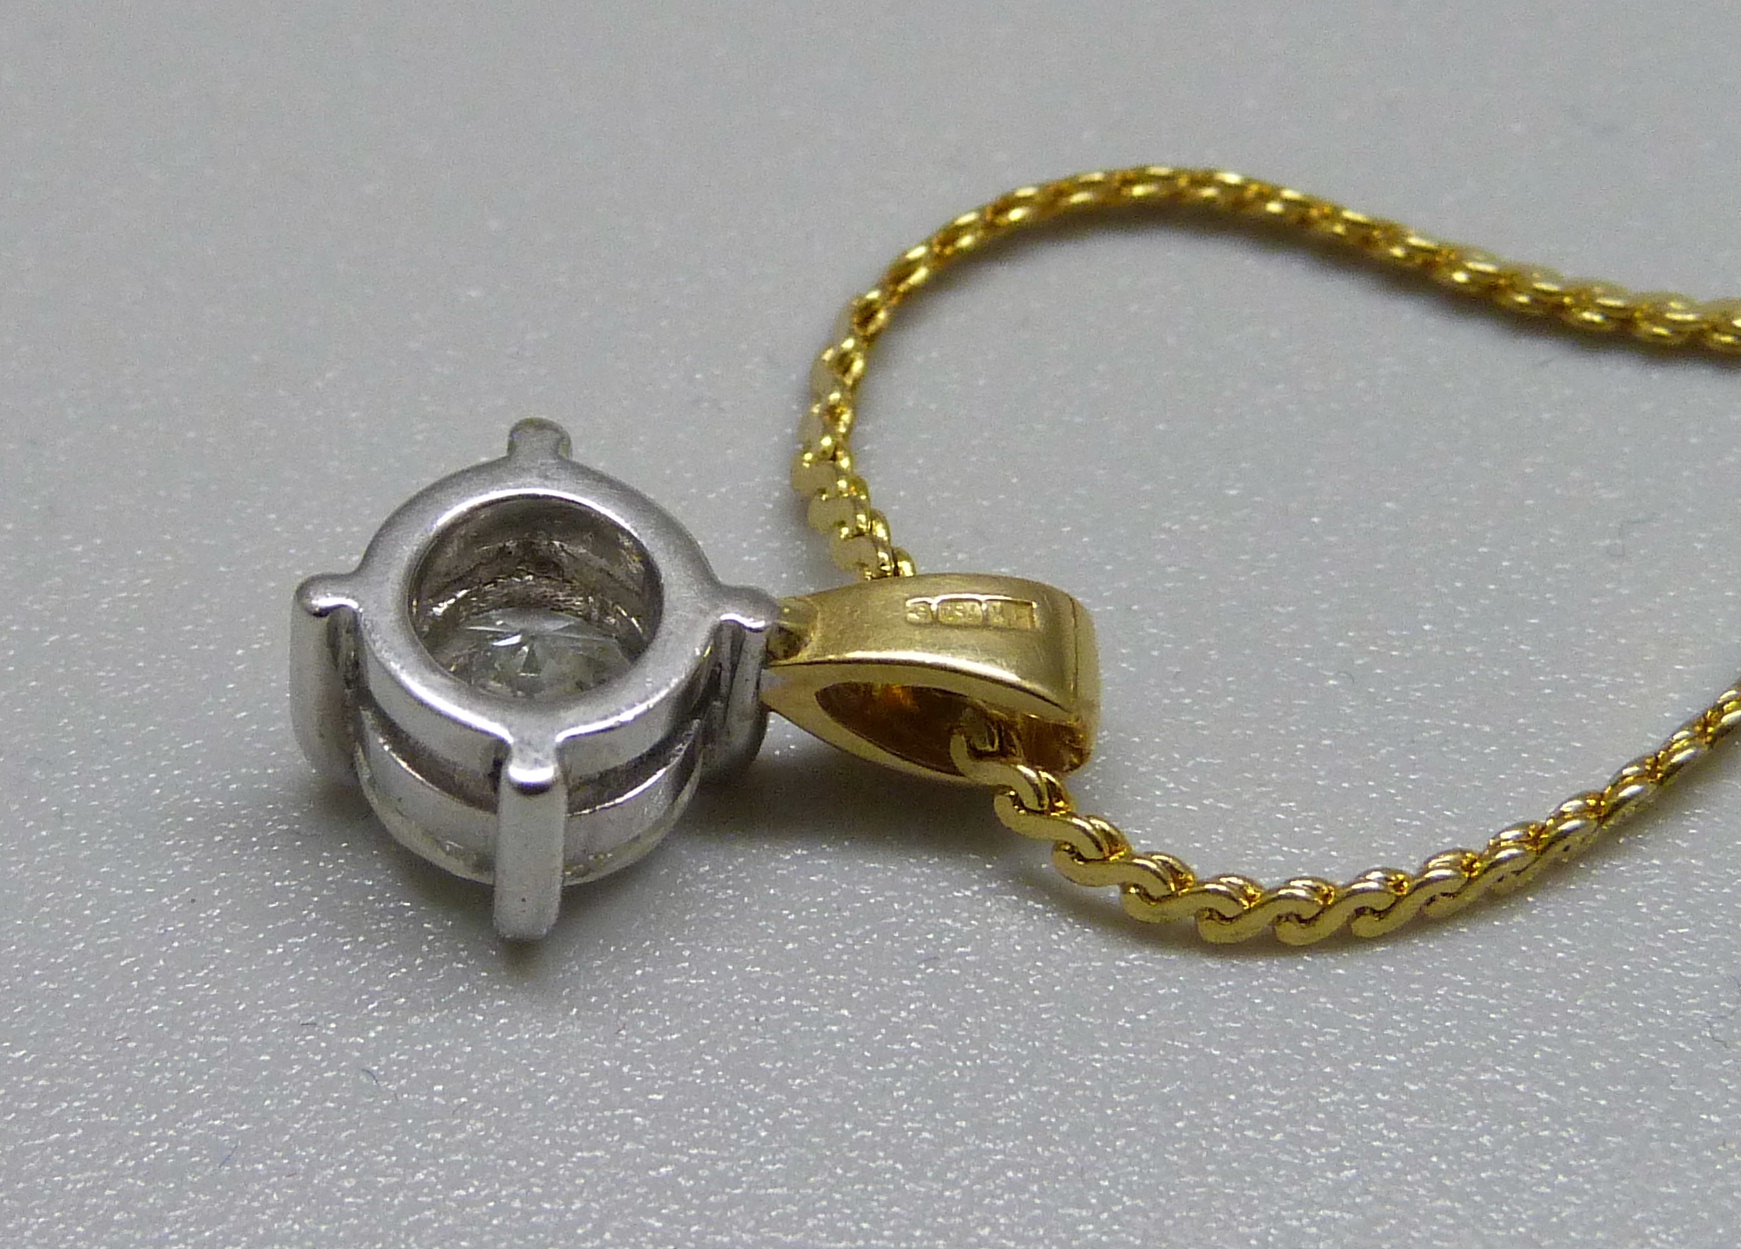 An 18ct gold and diamond pendant, approximately 0.90ct diamond weight, on a plated chain - Image 2 of 3